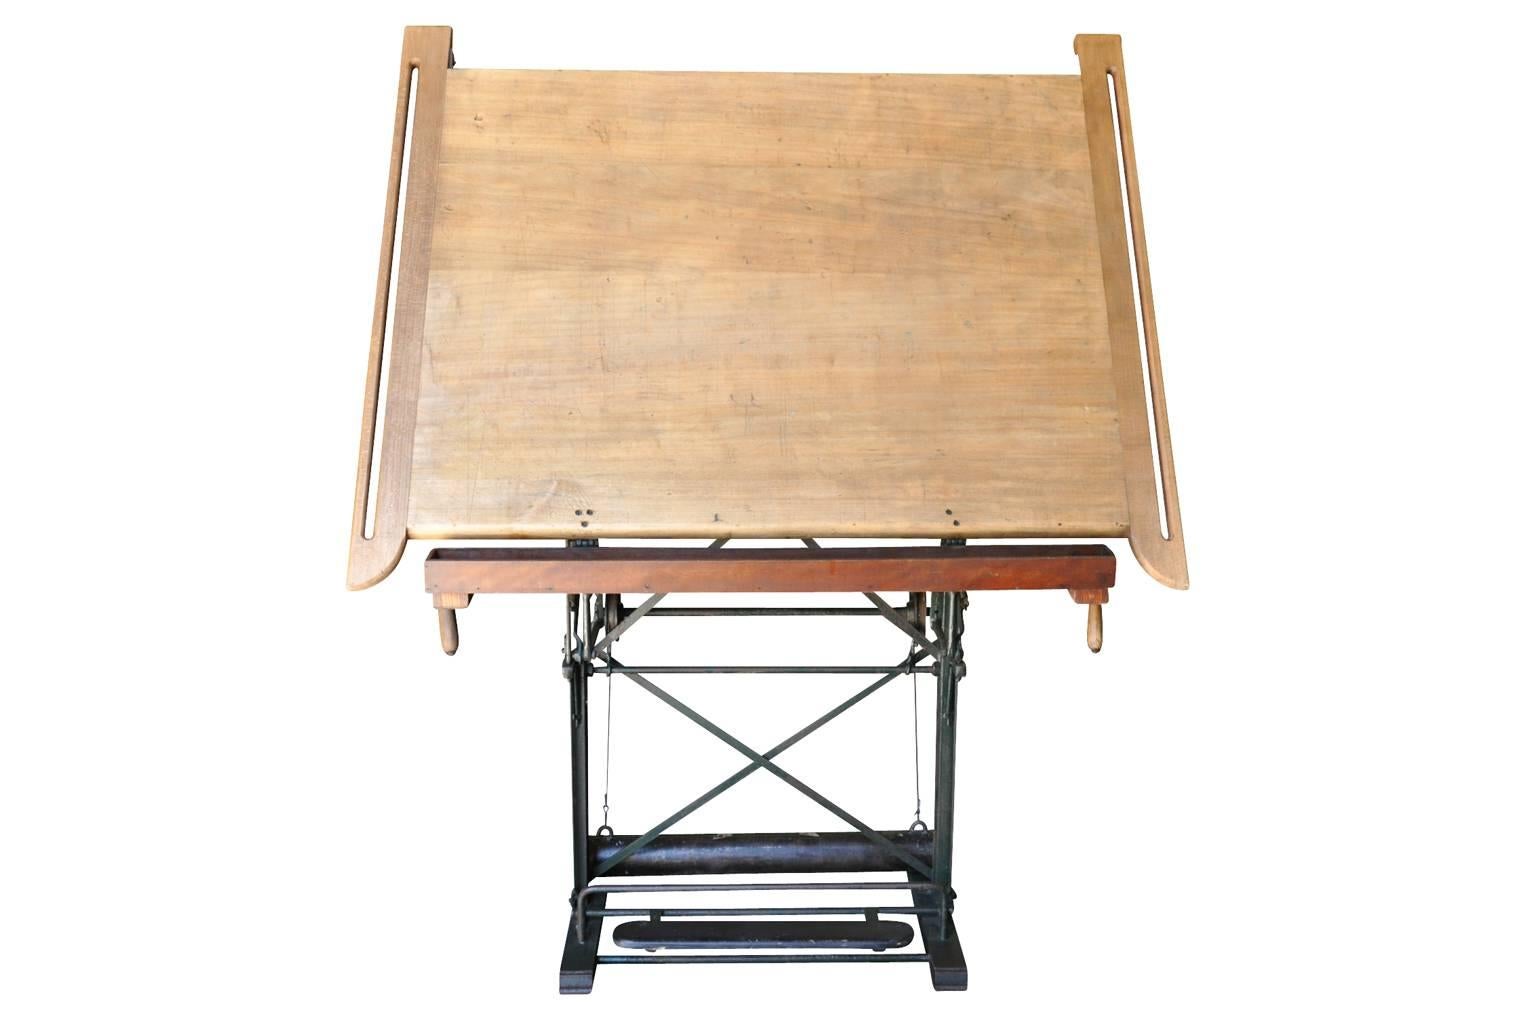 A wonderful early 20th century drafting table, architect's drawing table from France. Soundly constructed in beechwood. Not only great to draw from but a terrific decorative piece that serves beautifully as an easel for the display of a painting or